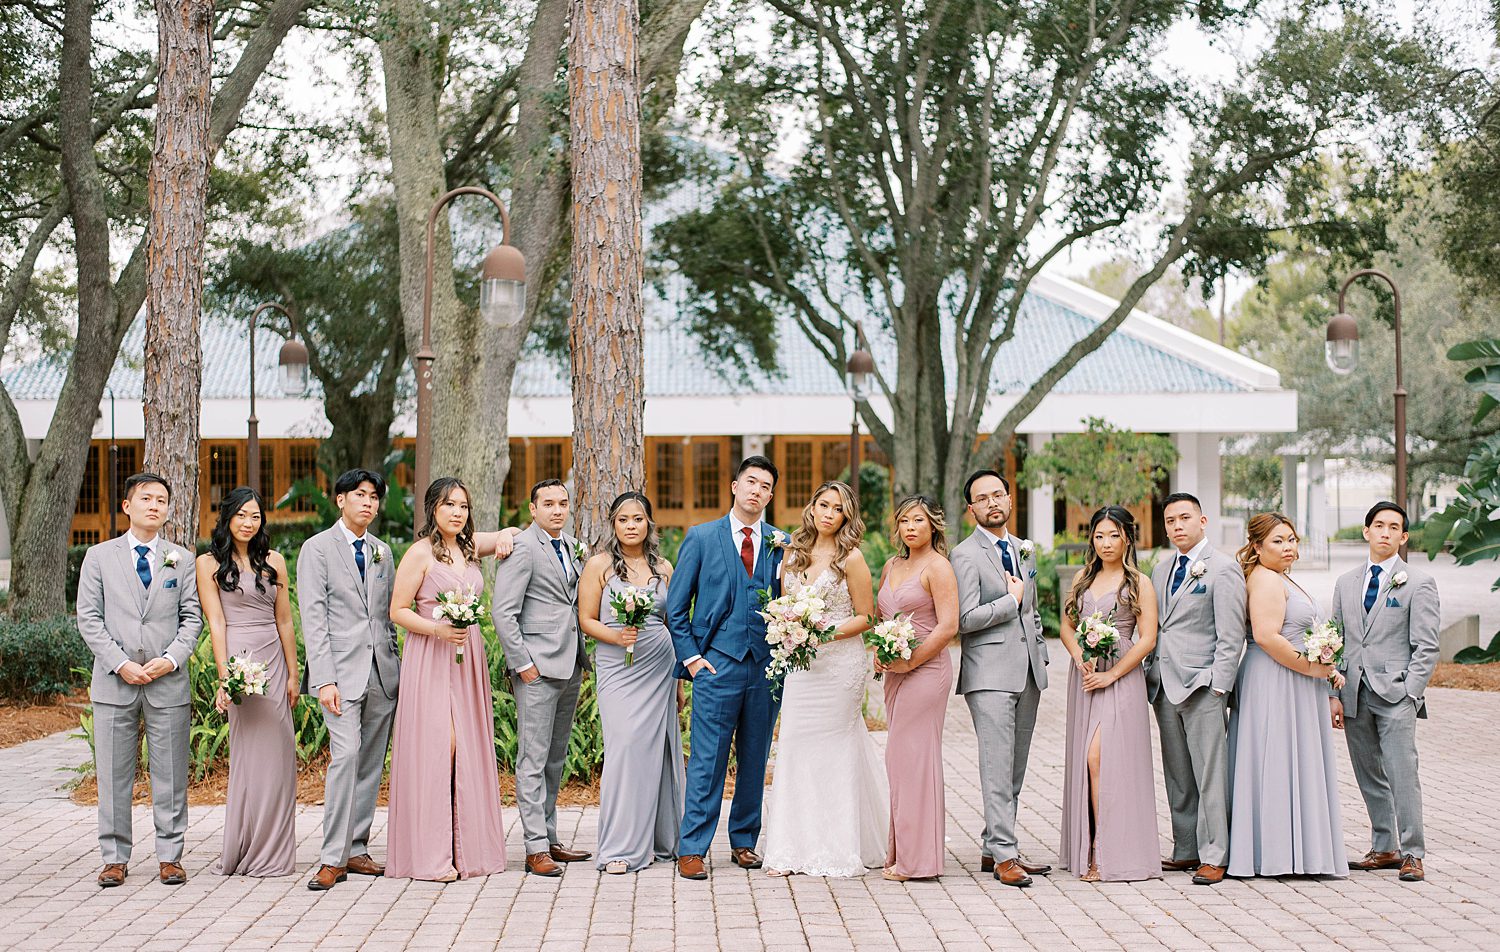 bride and groom pose with wedding party in mismatched blue and purple gowns and grey suits 